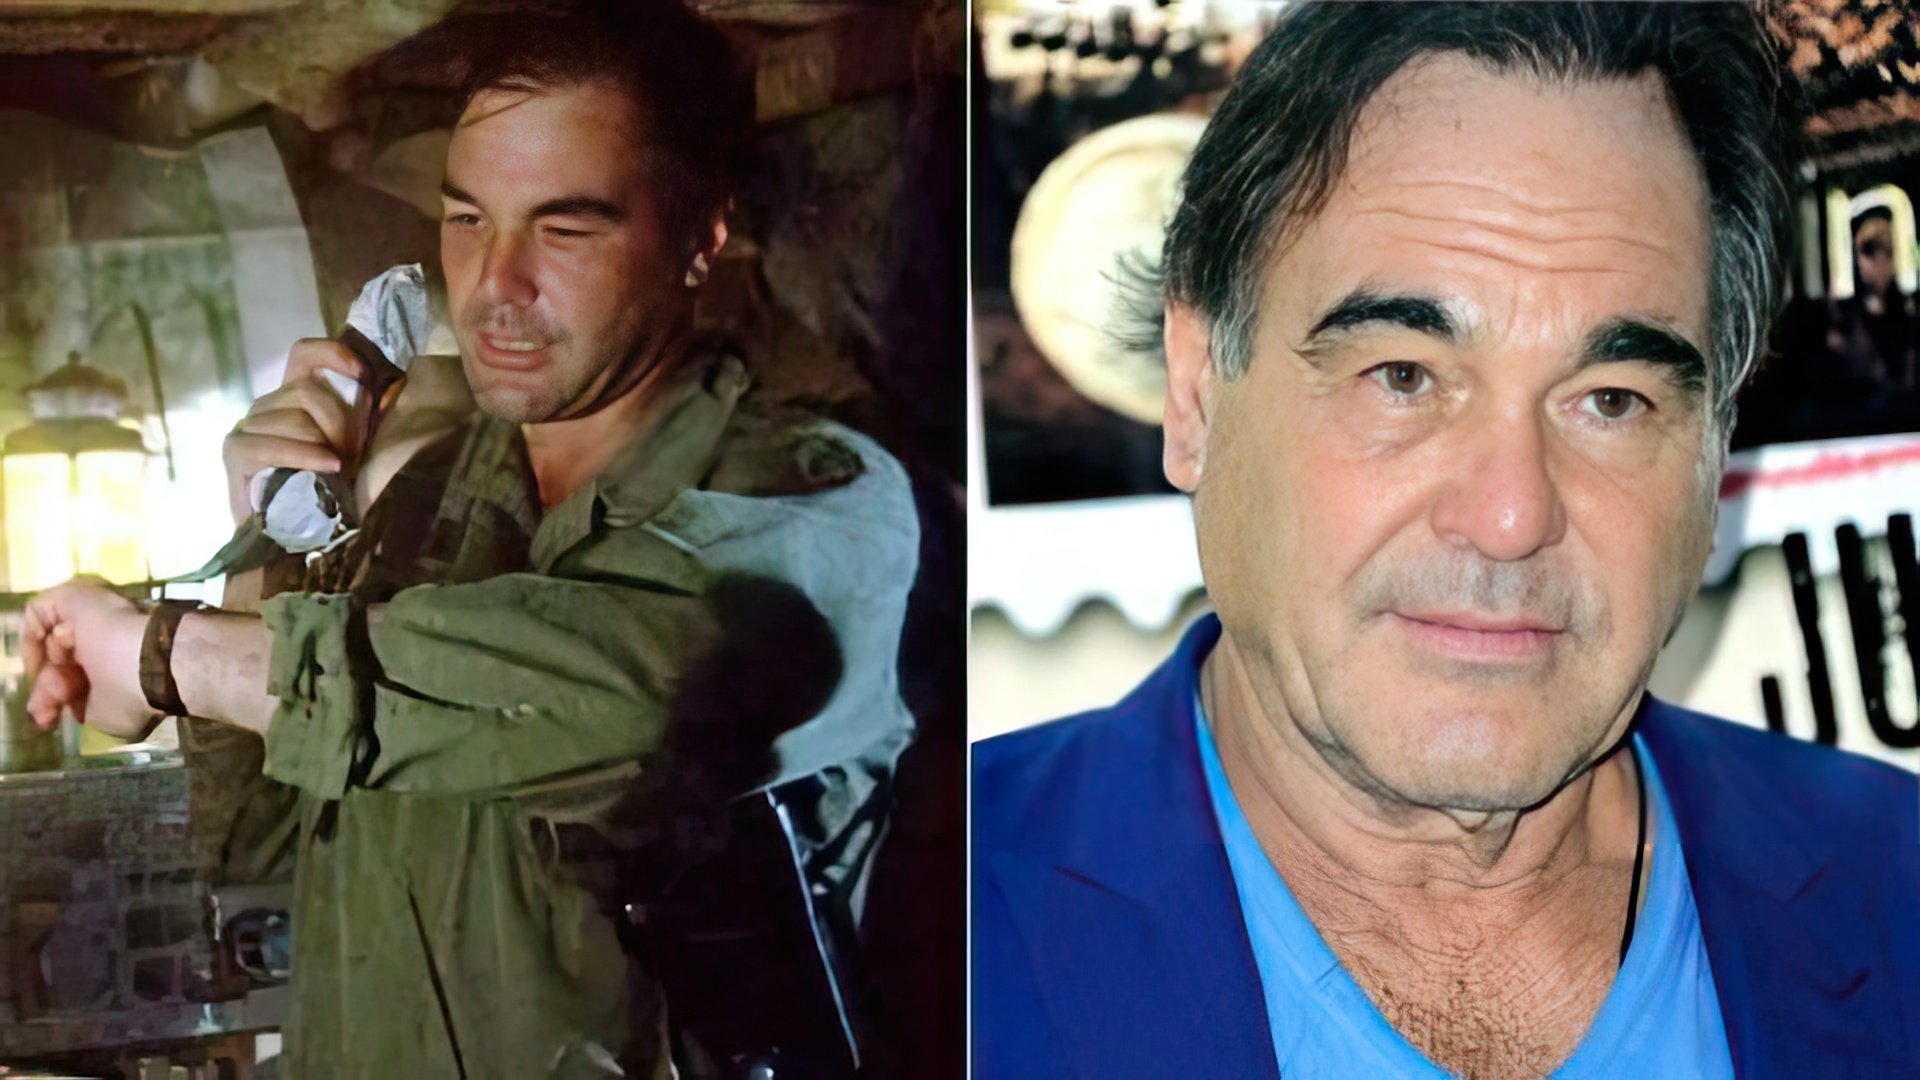 Platoon: Oliver Stone in a cameo role